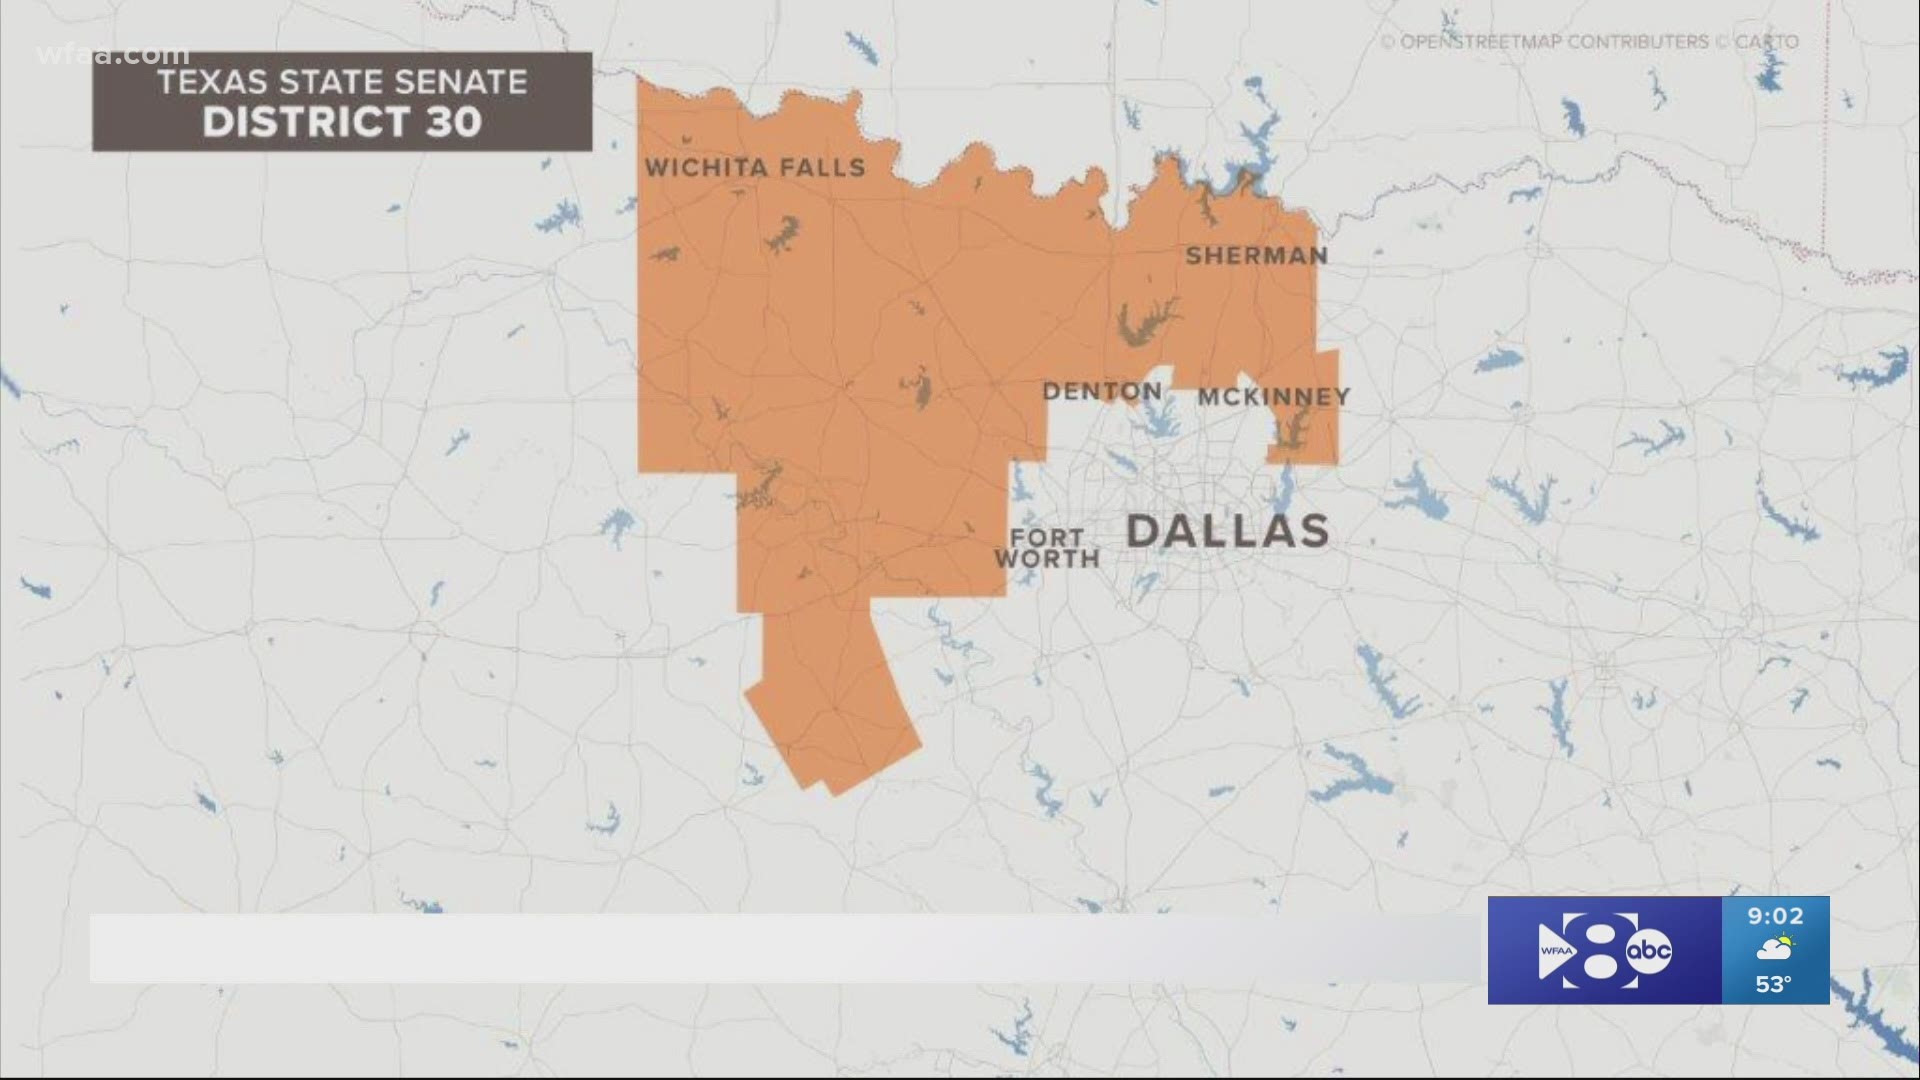 The Senate District 30 runoff is scheduled for Dec. 19 between state Rep. Drew Springer and Shelley Luther, the Dallas salon owner who was jailed earlier this year.